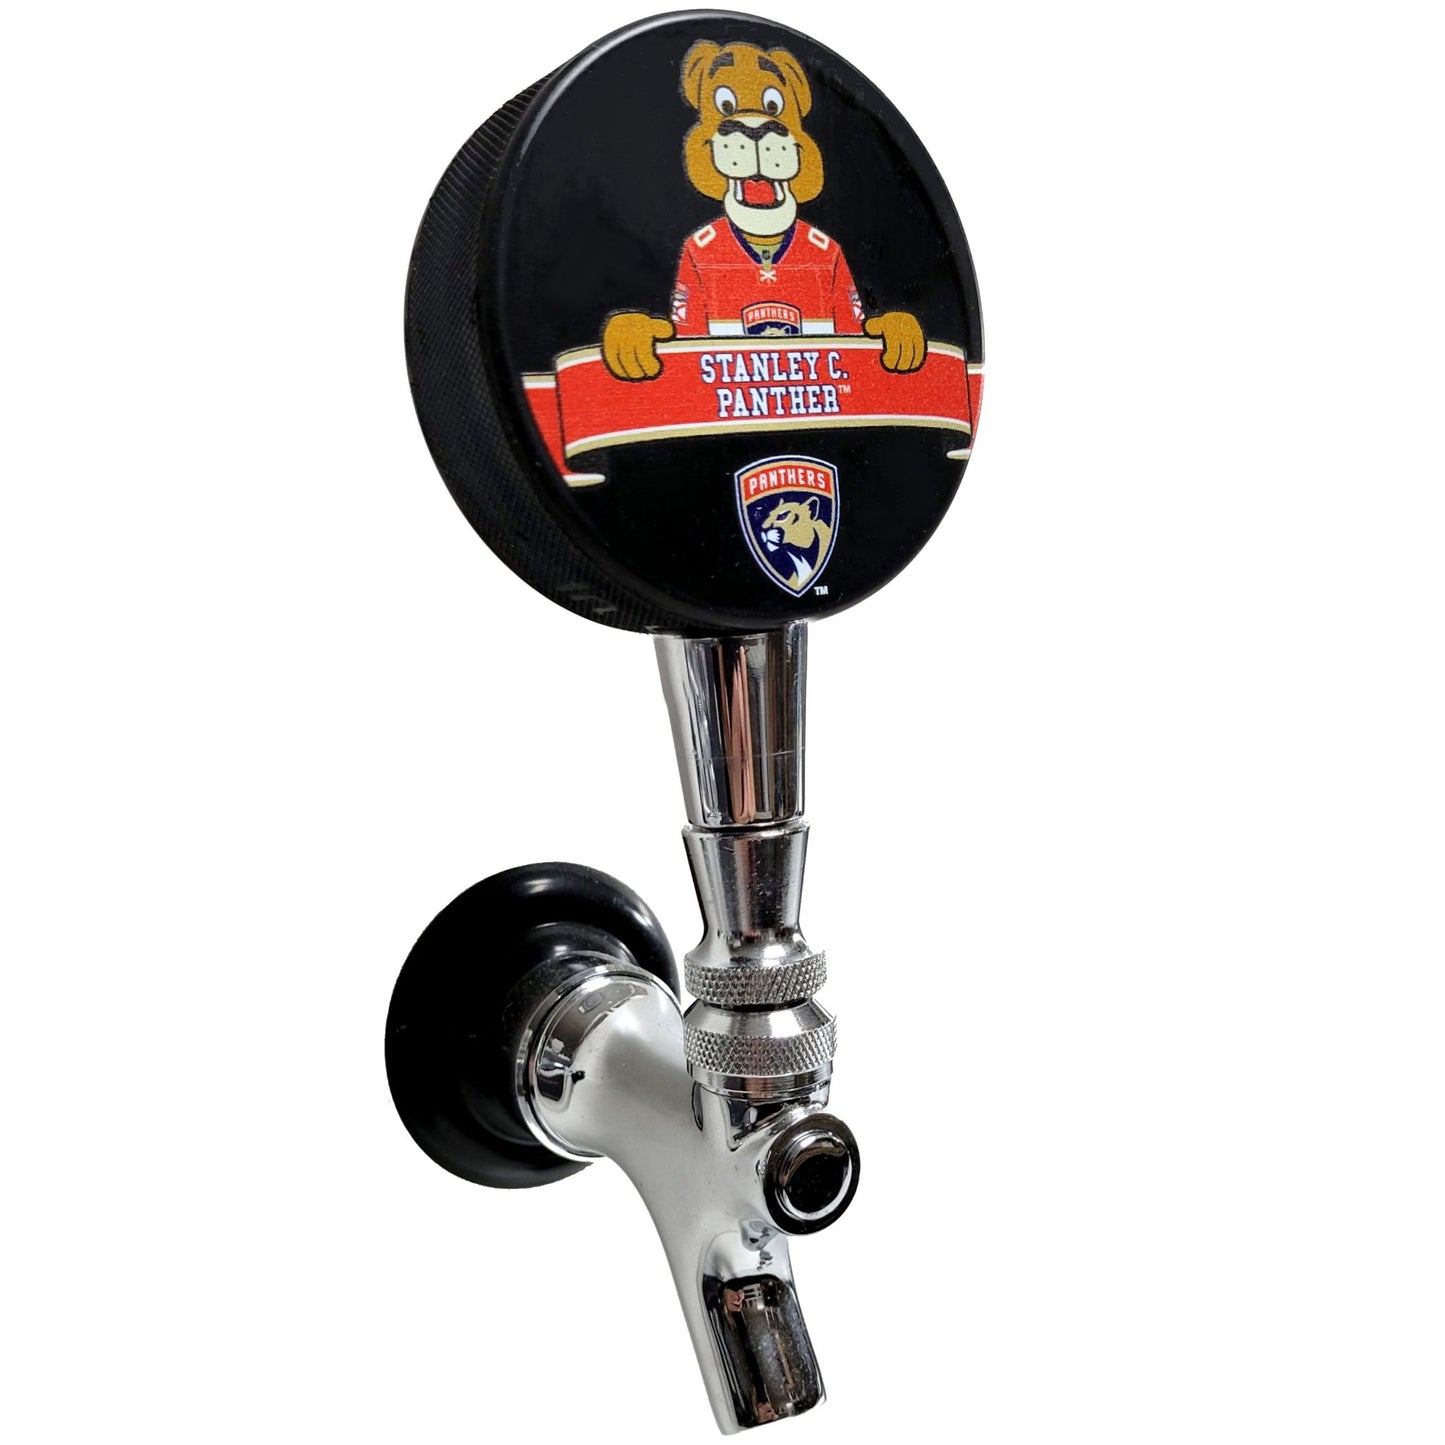 Florida Panthers Stanley C. Panther Mascot Hockey Puck Beer Tap Handle